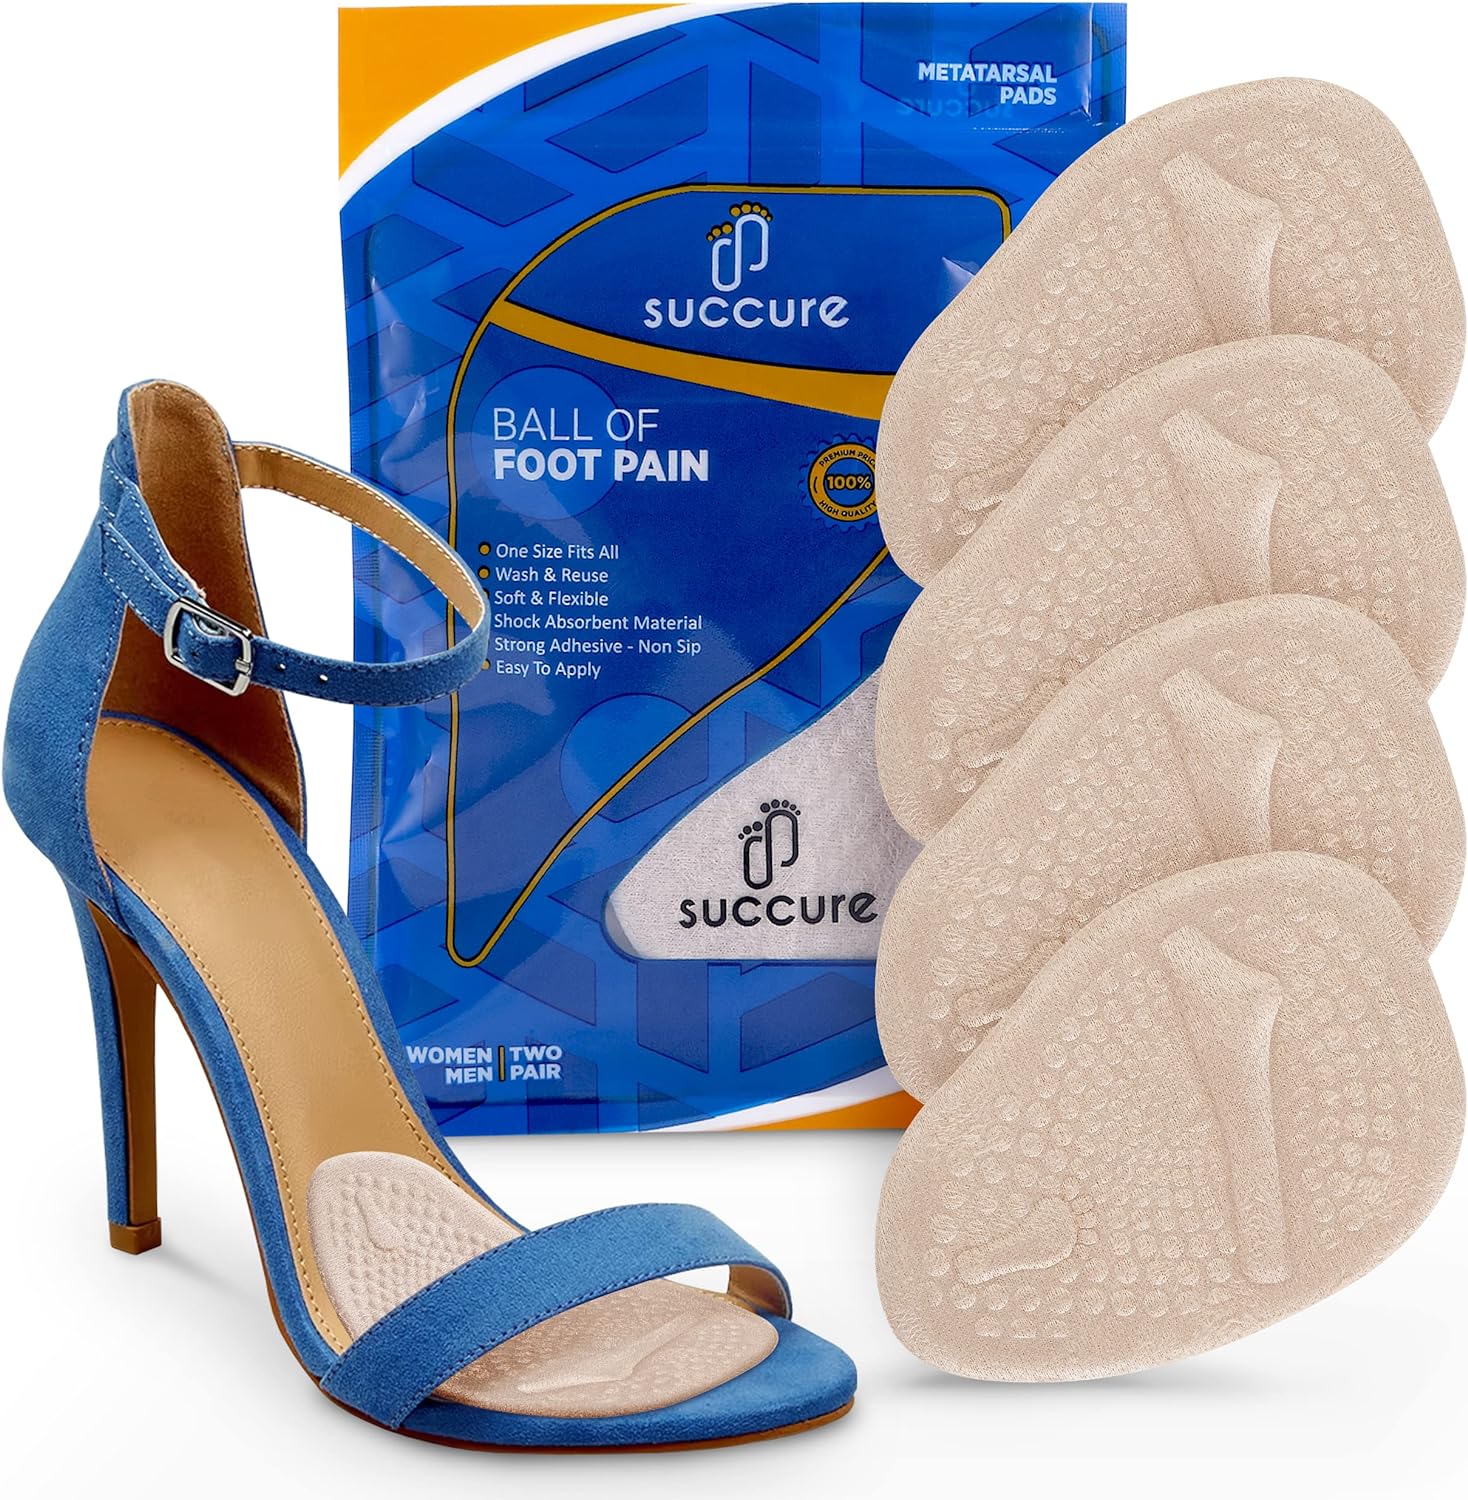 Succure 2 Pair Metatarsal Pads for Women  Mens - Ball of Foot Cushions for Women High Heel - Helps with Pain Instantly - 0.12in Thick Mortons Neuroma Inserts - Soft Foot Pads Ball of Foot Pain